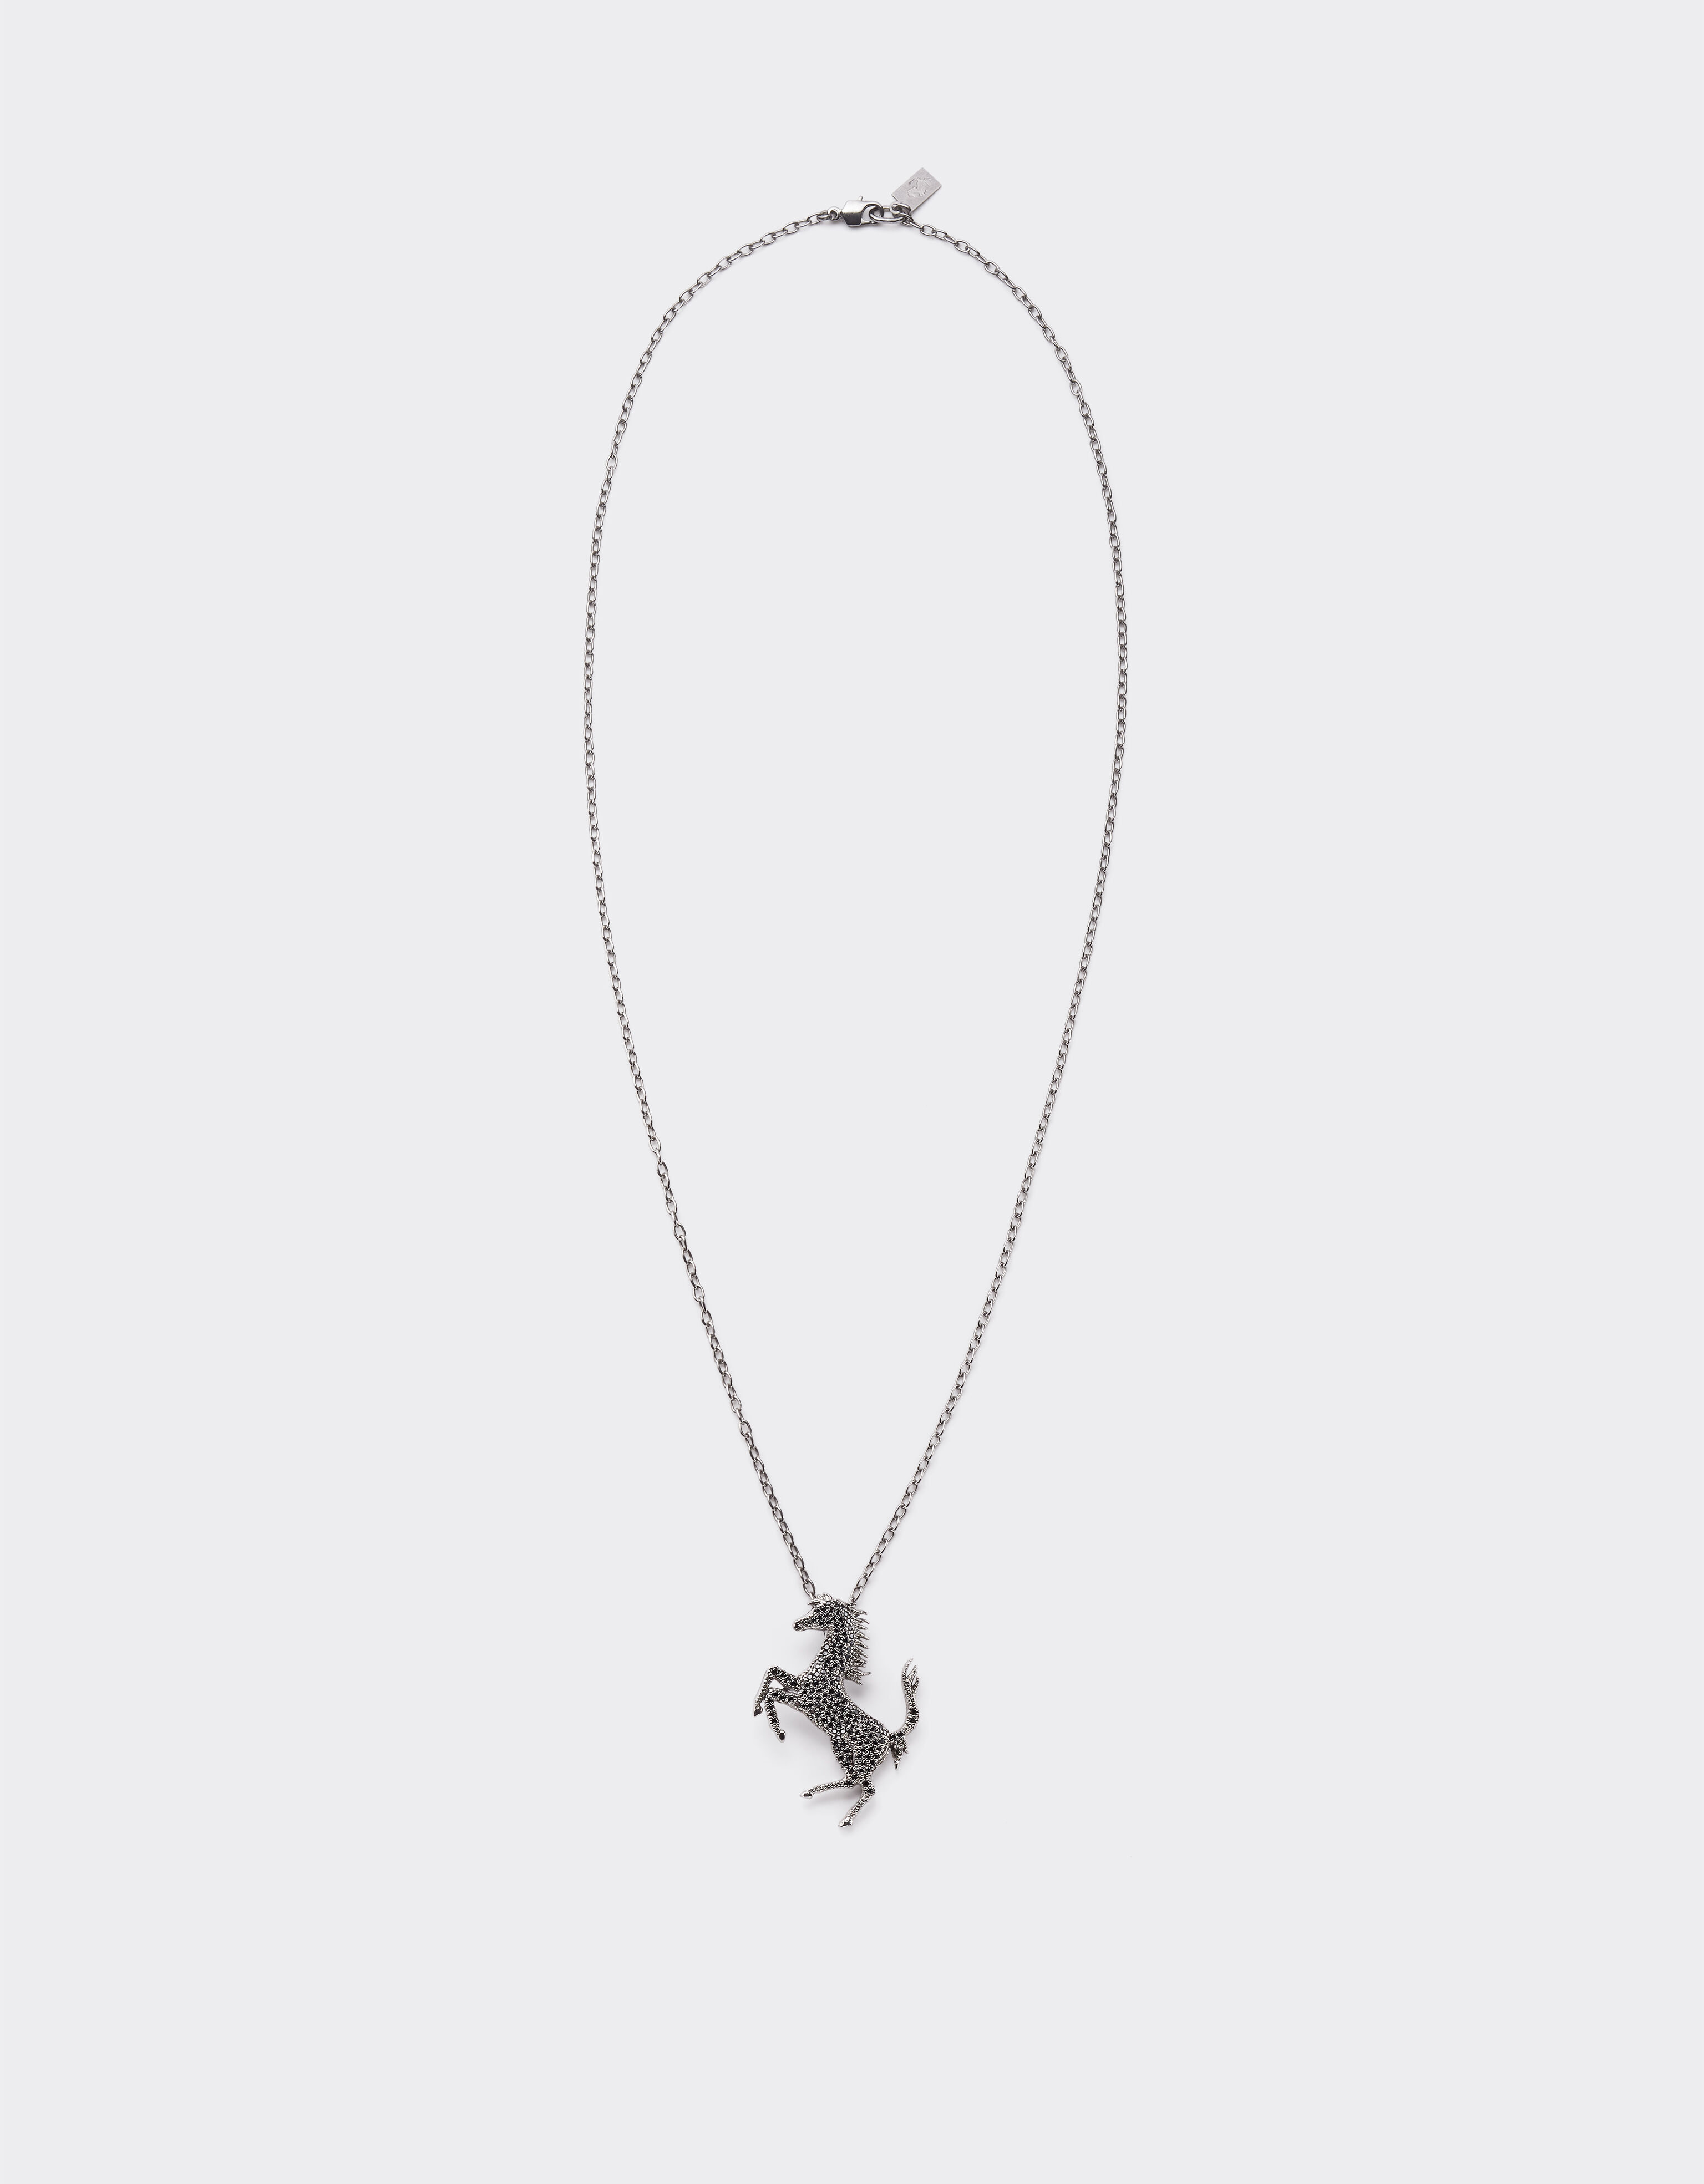 Ferrari Prancing Horse necklace with rhinestones Charcoal 20014f